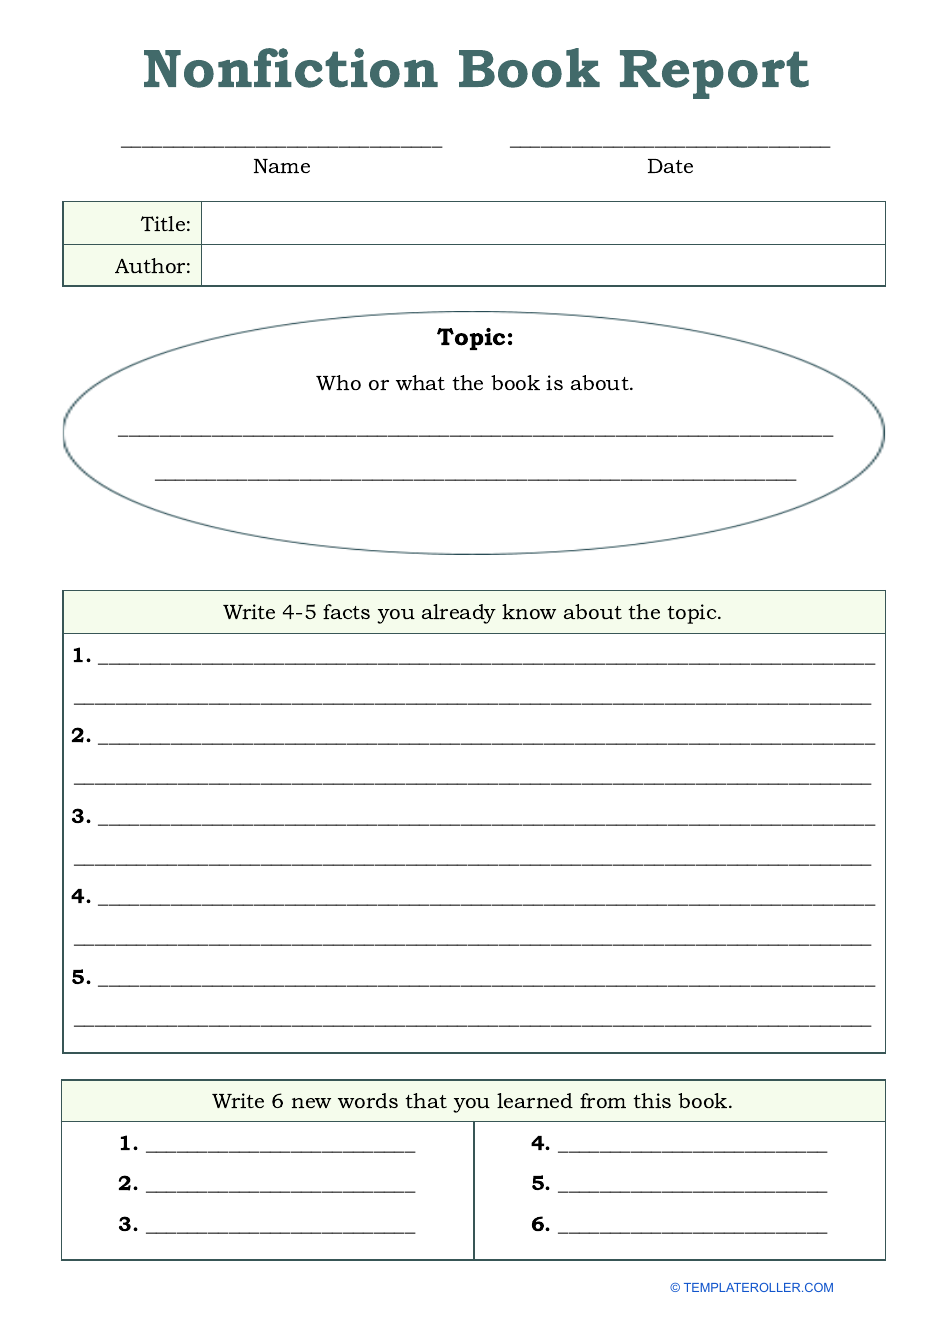 Nonfiction Book Report Template, Page 1